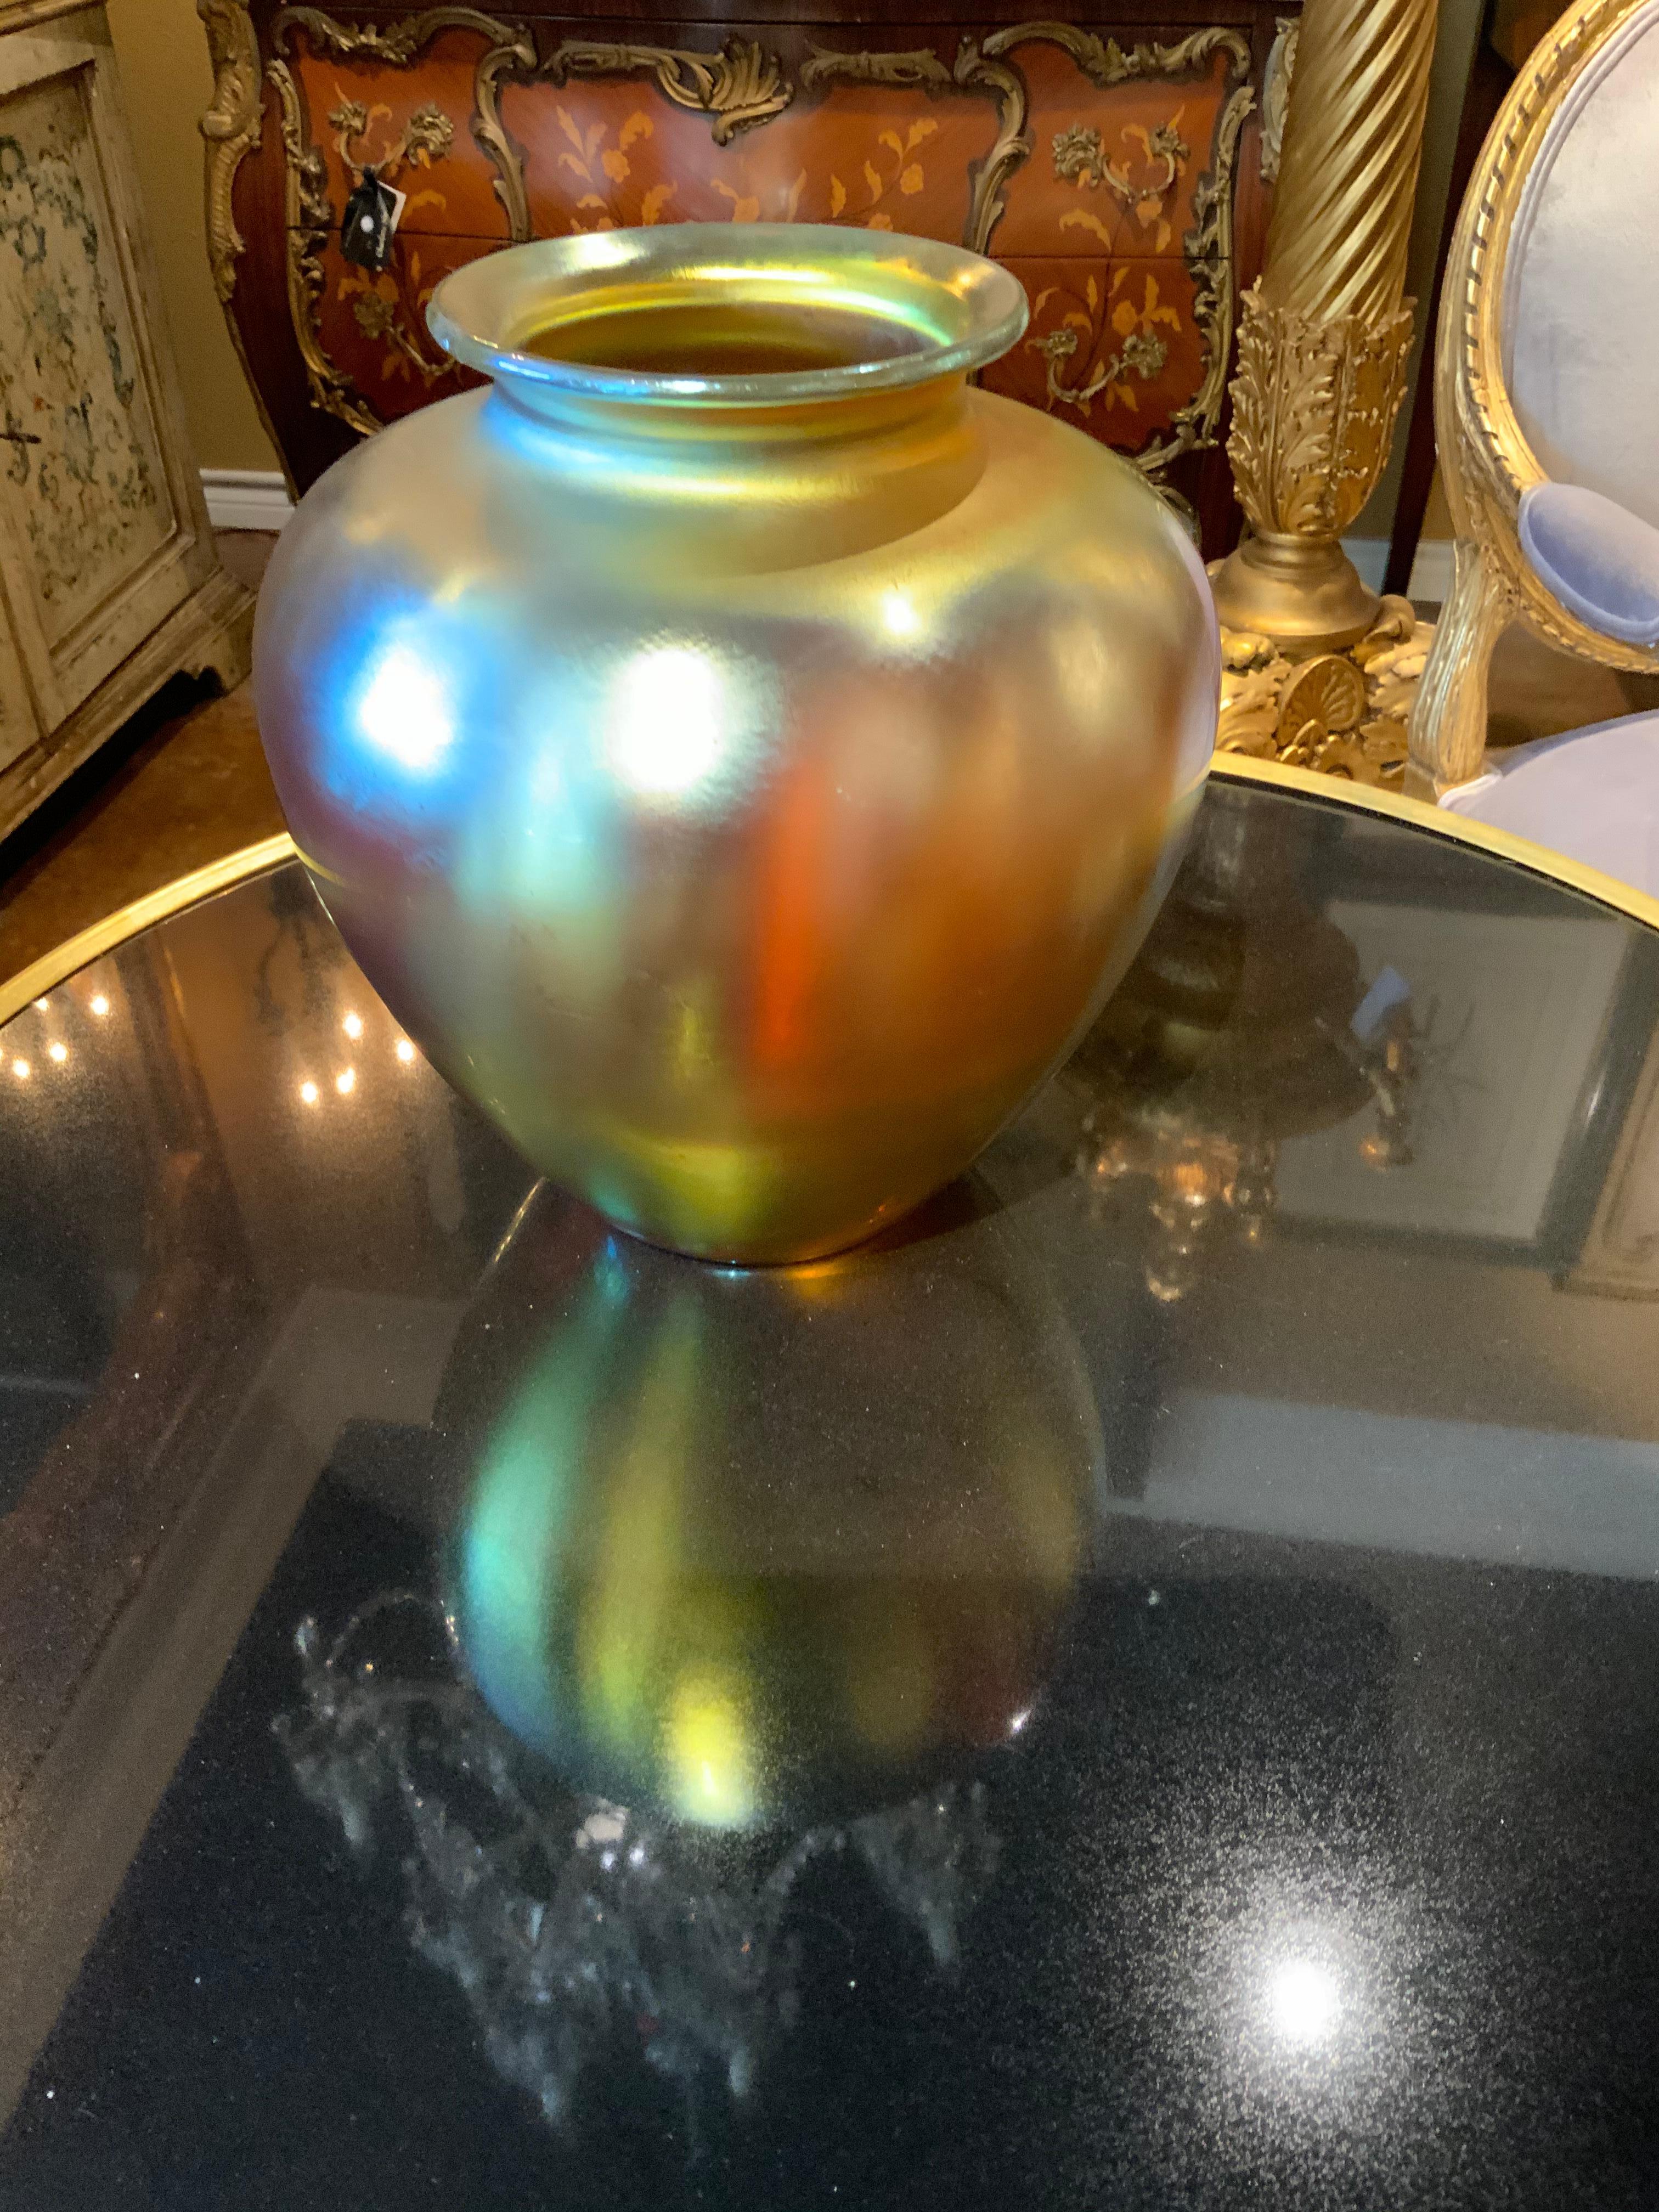 Large iridescent vase by renowned art glass maker F. Carder in shades of
Gold Aurene, baluster shape with acid etched signature on the base in
An Art Nouveau style. This piece has striking beauty in an elegant shape
and exquisite color.